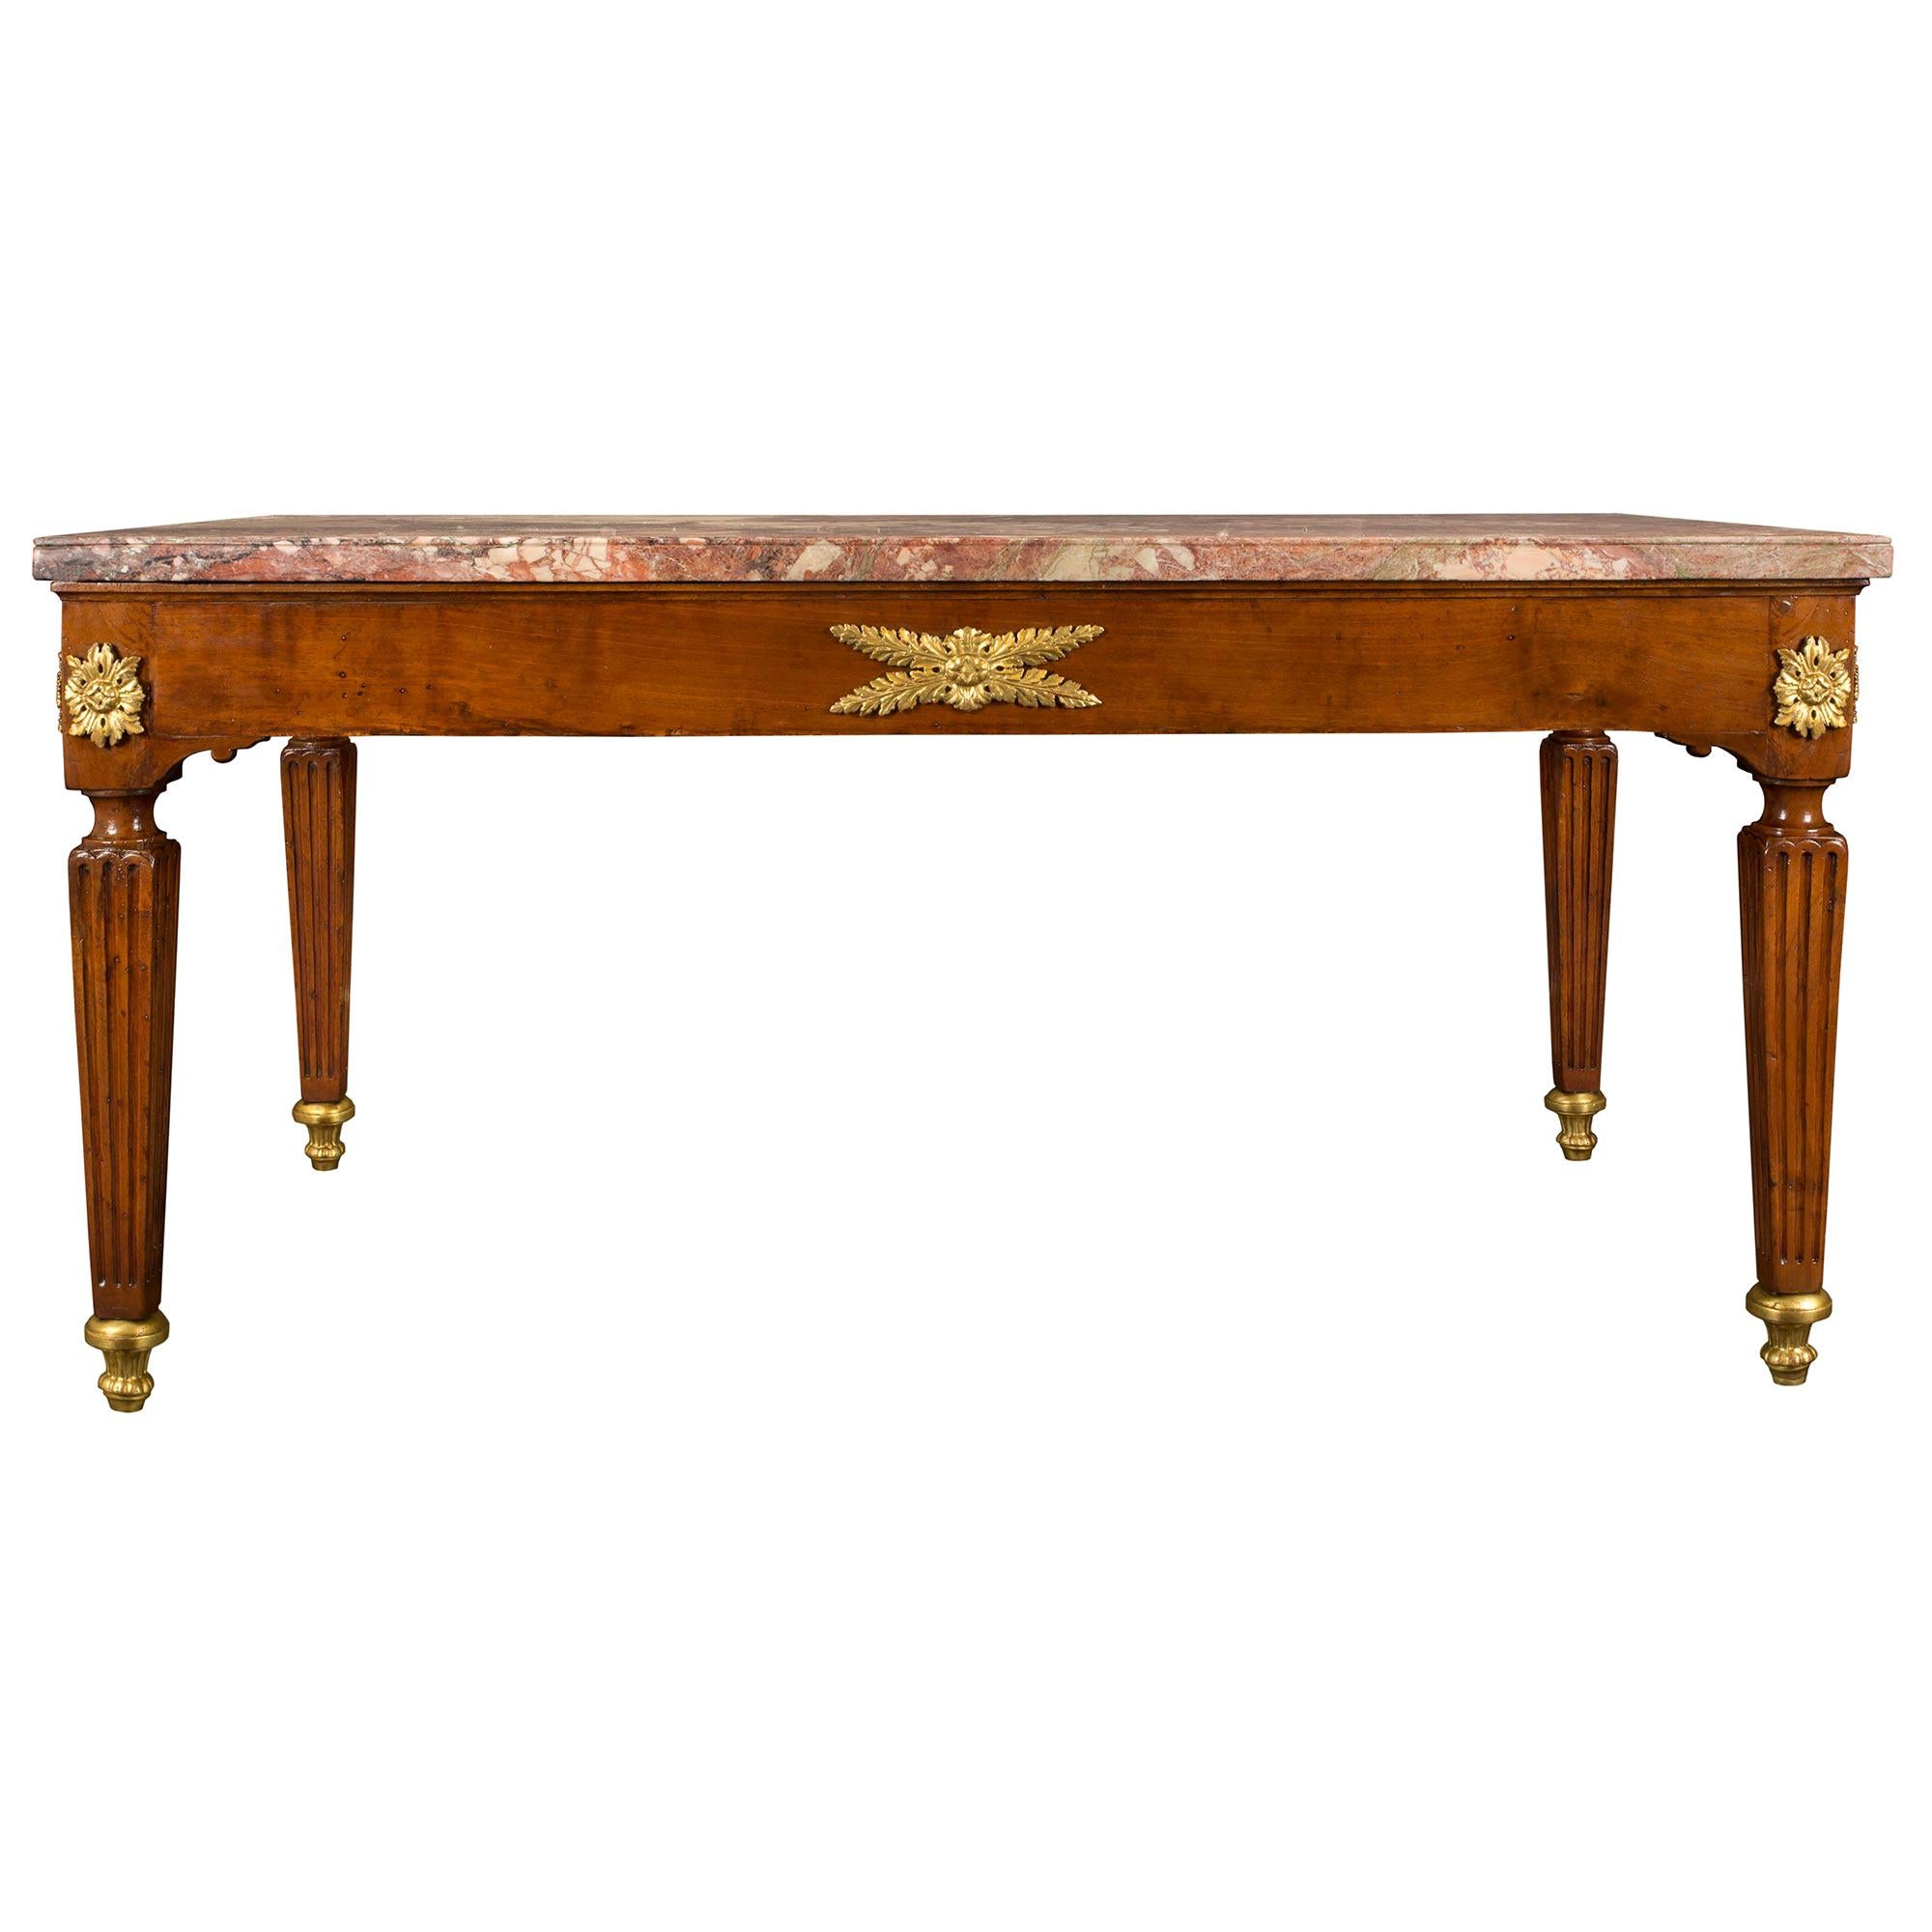 Italian 18th Century Louis XVI Period Walnut, Giltwood and Marble Center Table For Sale